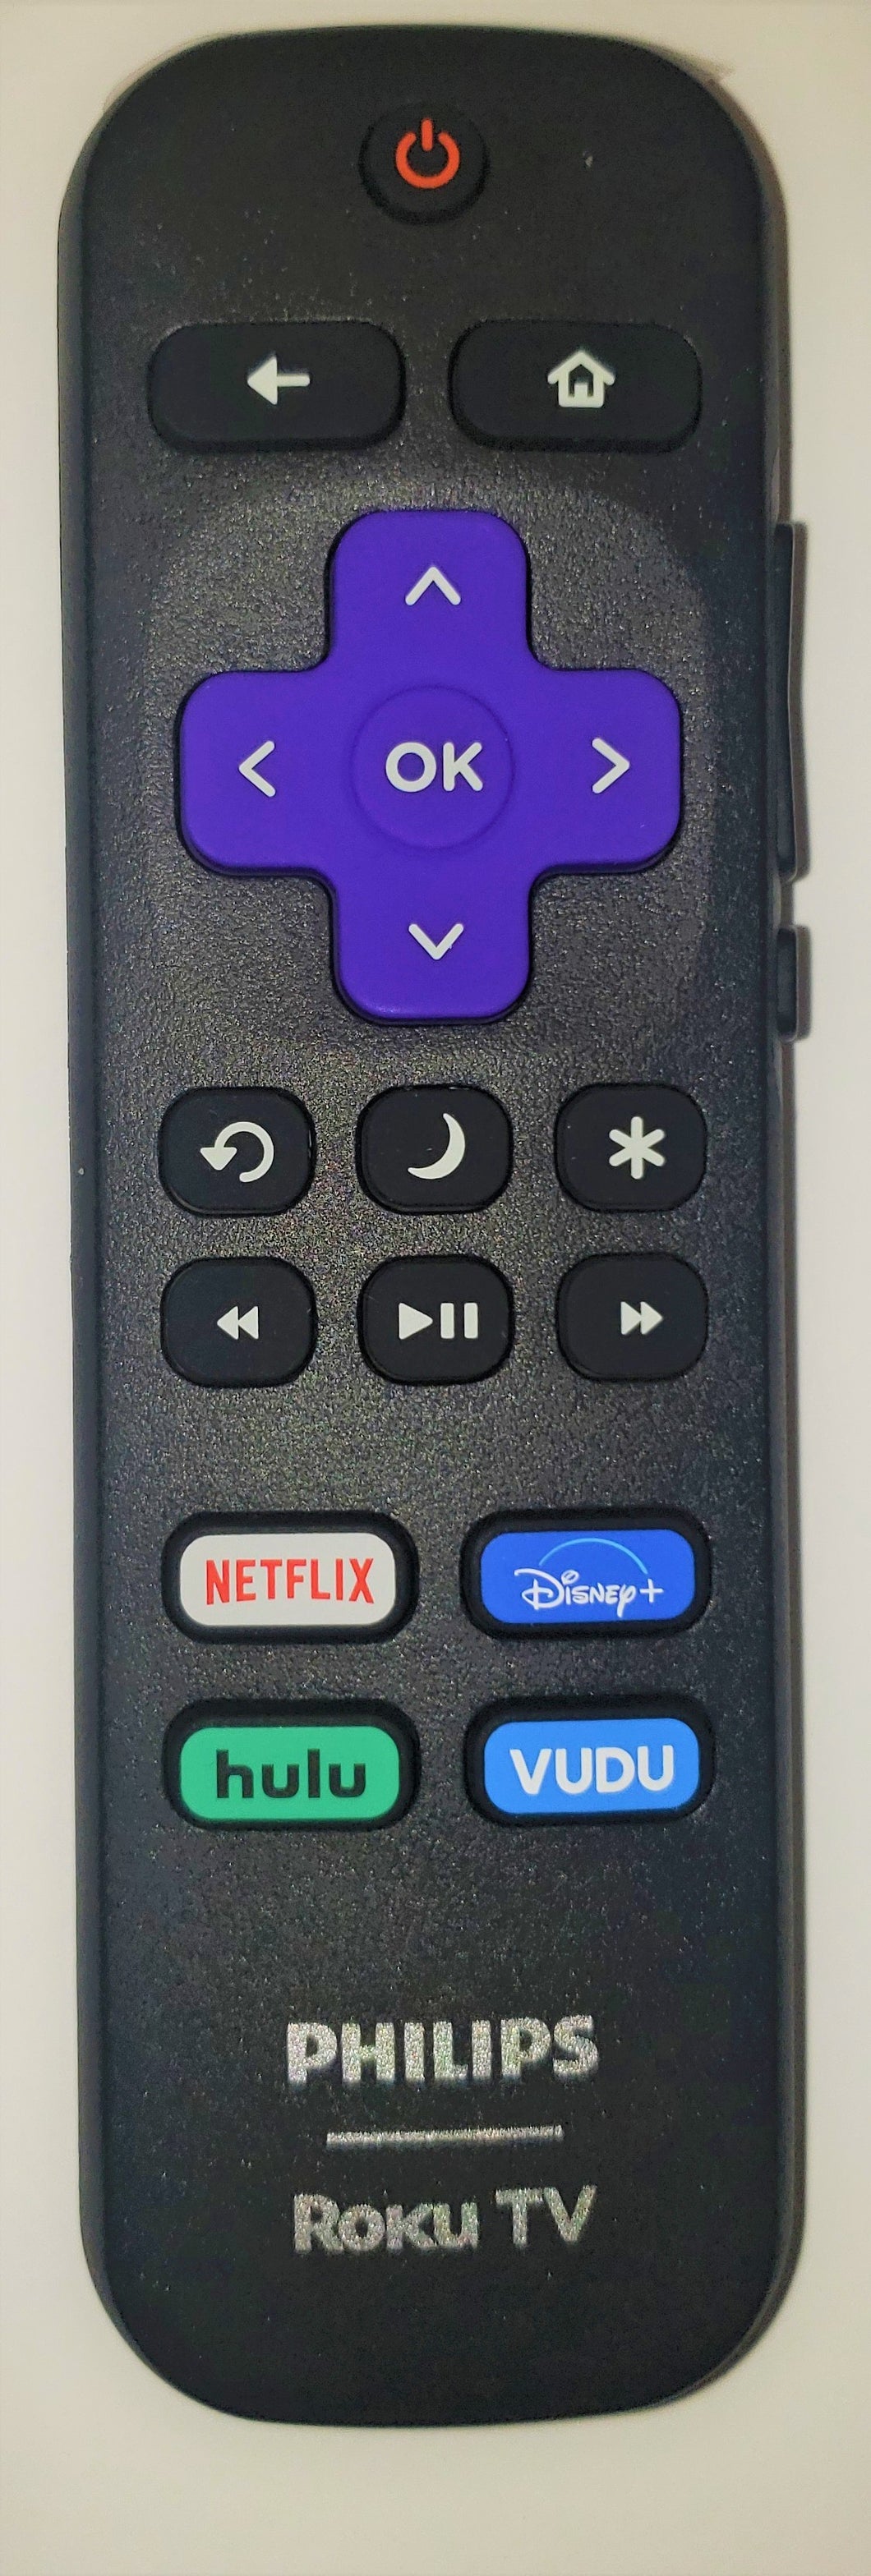 OEM replacement remote control for Philips Roku TV URMT21CND016